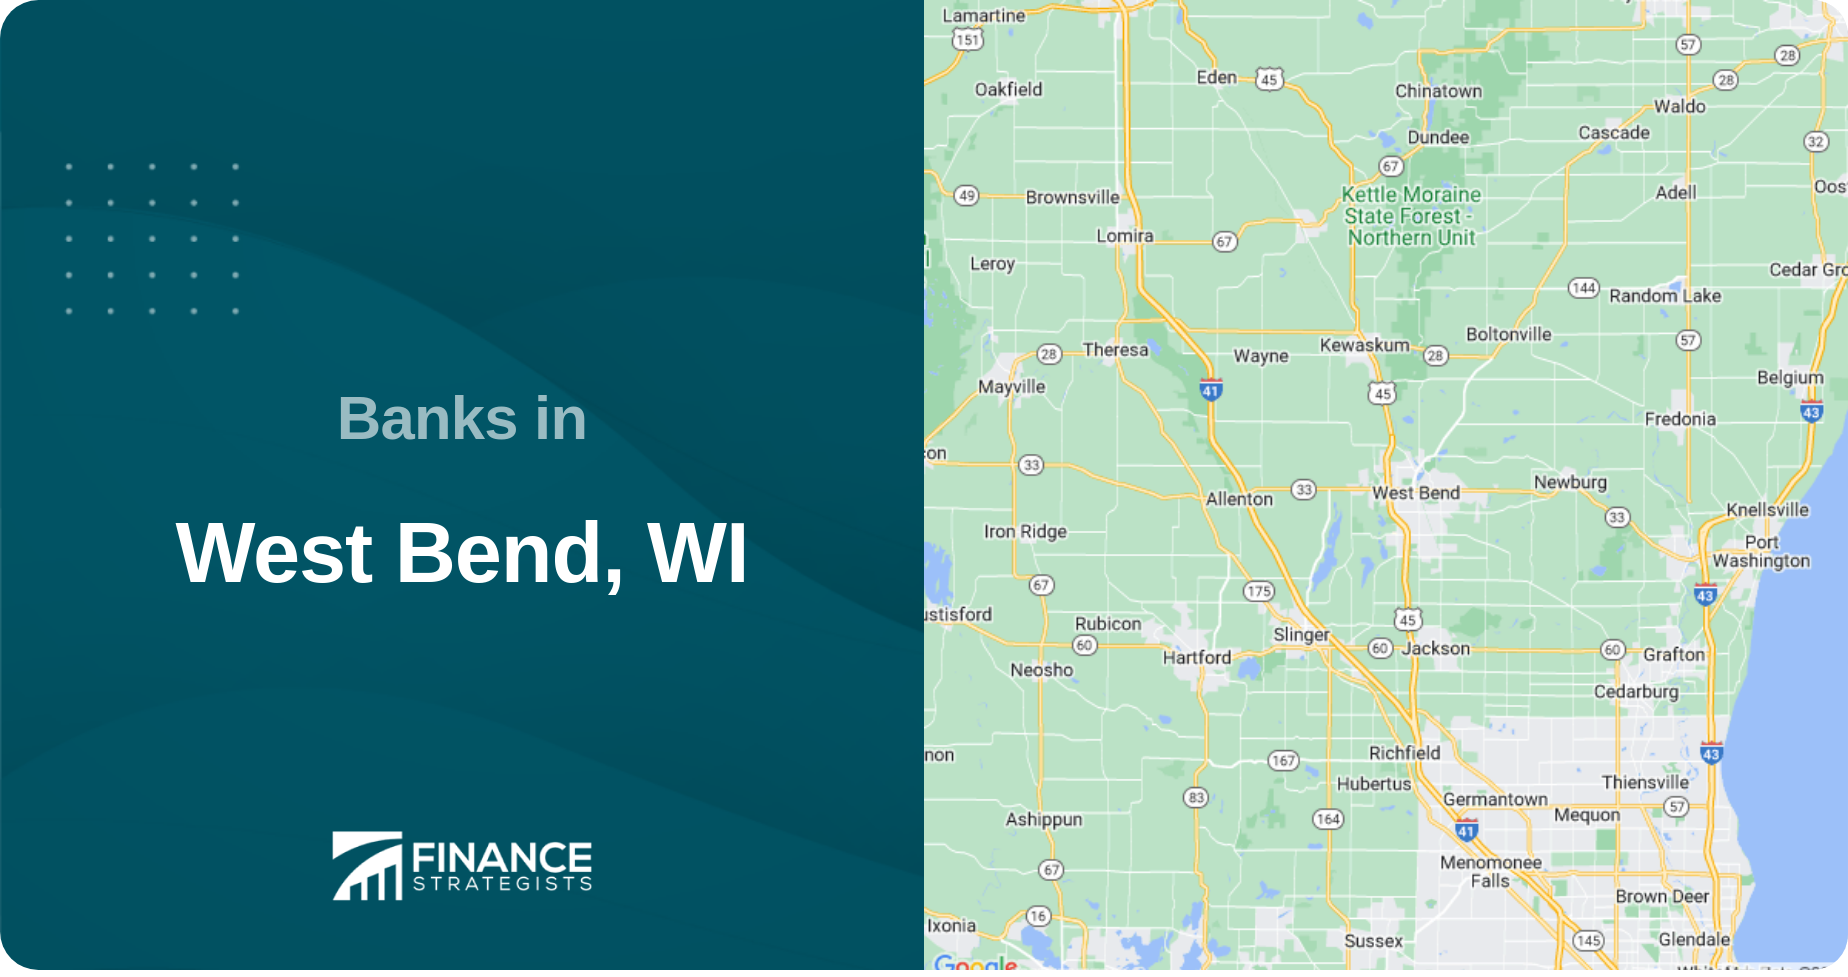 Banks in West Bend, WI